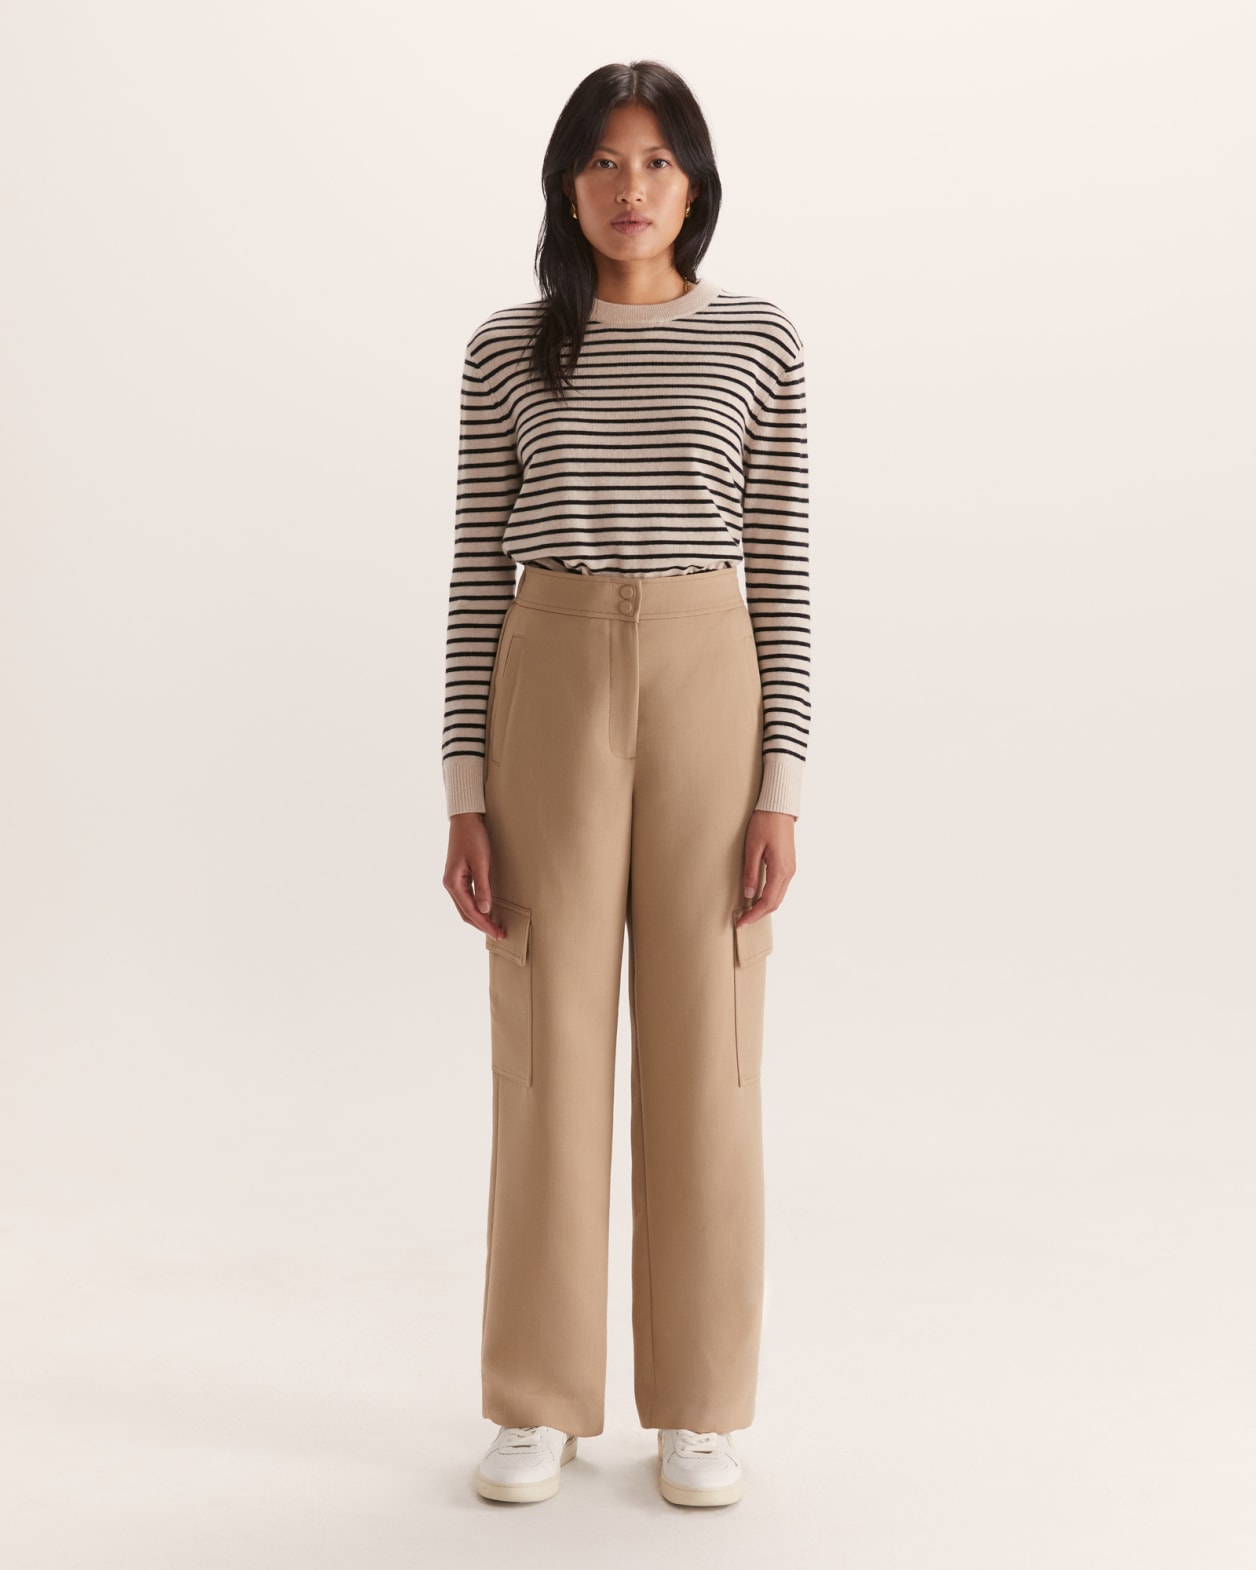 Nora Wool Cashmere Stripe Knit in SAND